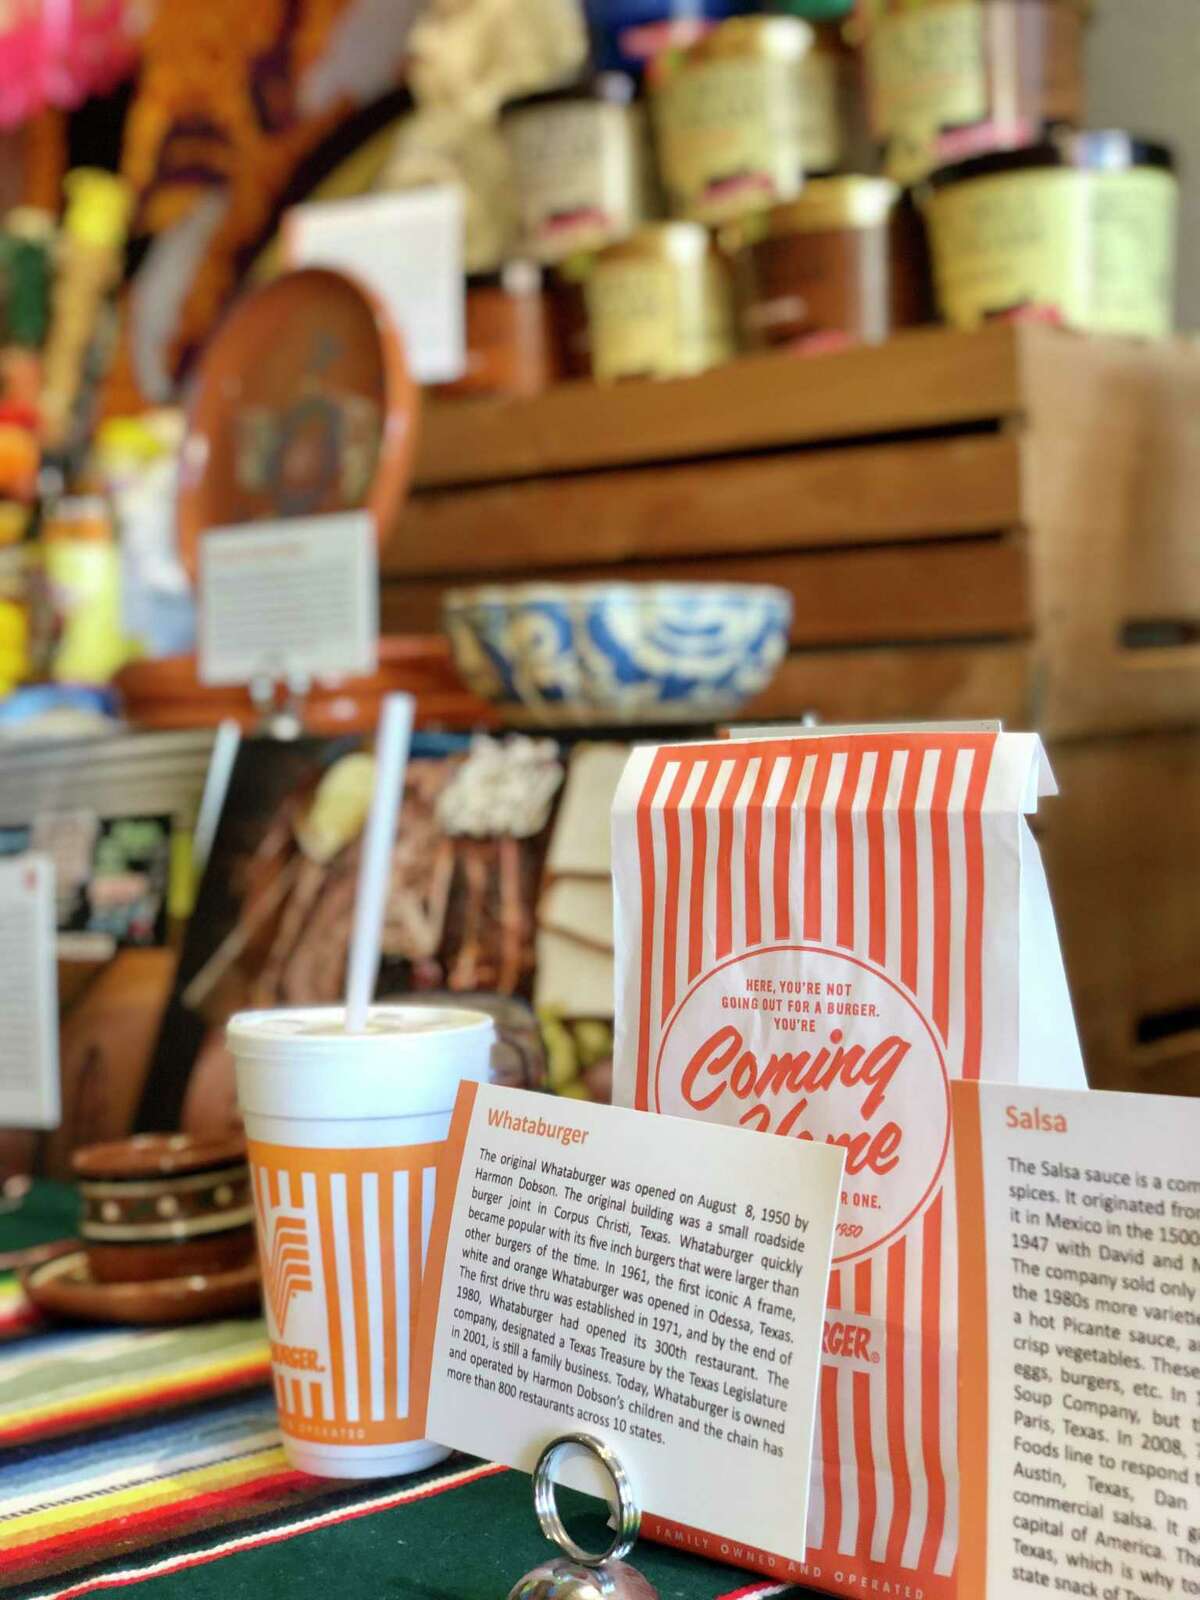 The museum’s Texas exhibit includes a Whataburger takeout bag and an empty soda cup from the burger chain.